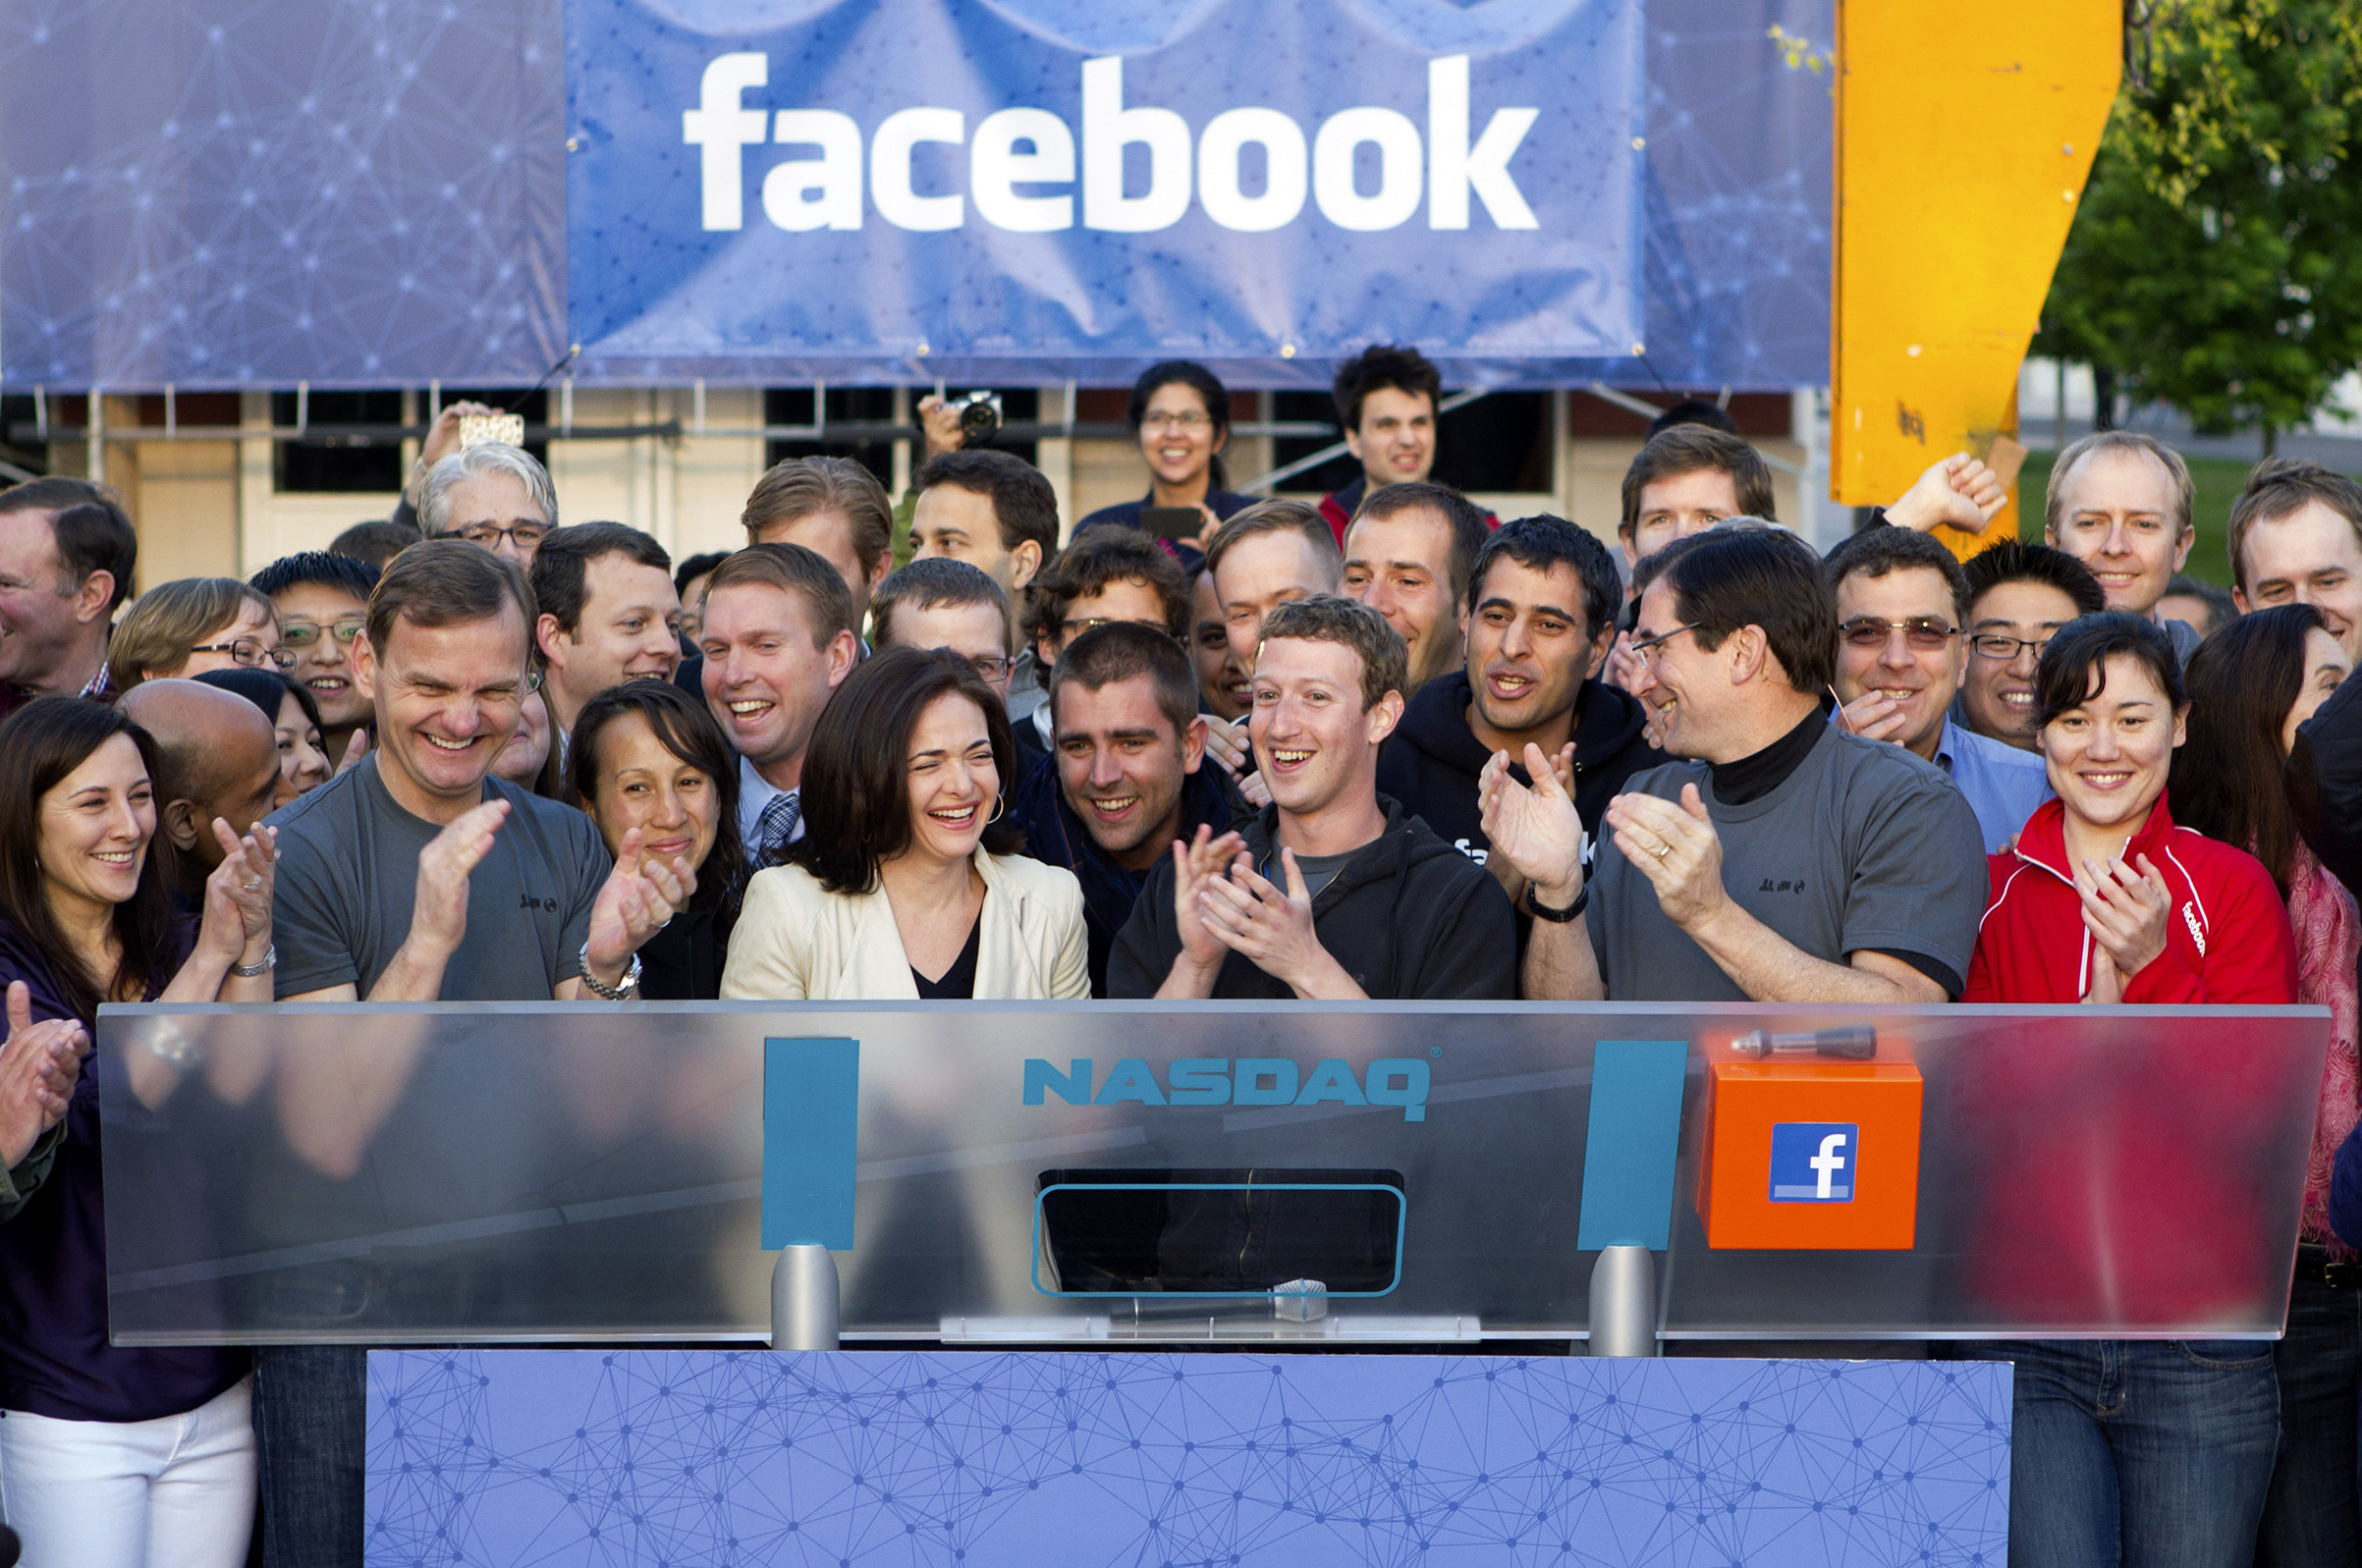 Zuckerberg and Sandberg celebrate Facebook’s May 18, 2012, IPO, which would come to be seen as a wild success (Zef Nikolla—Facebook/Bloomberg/Getty Images)